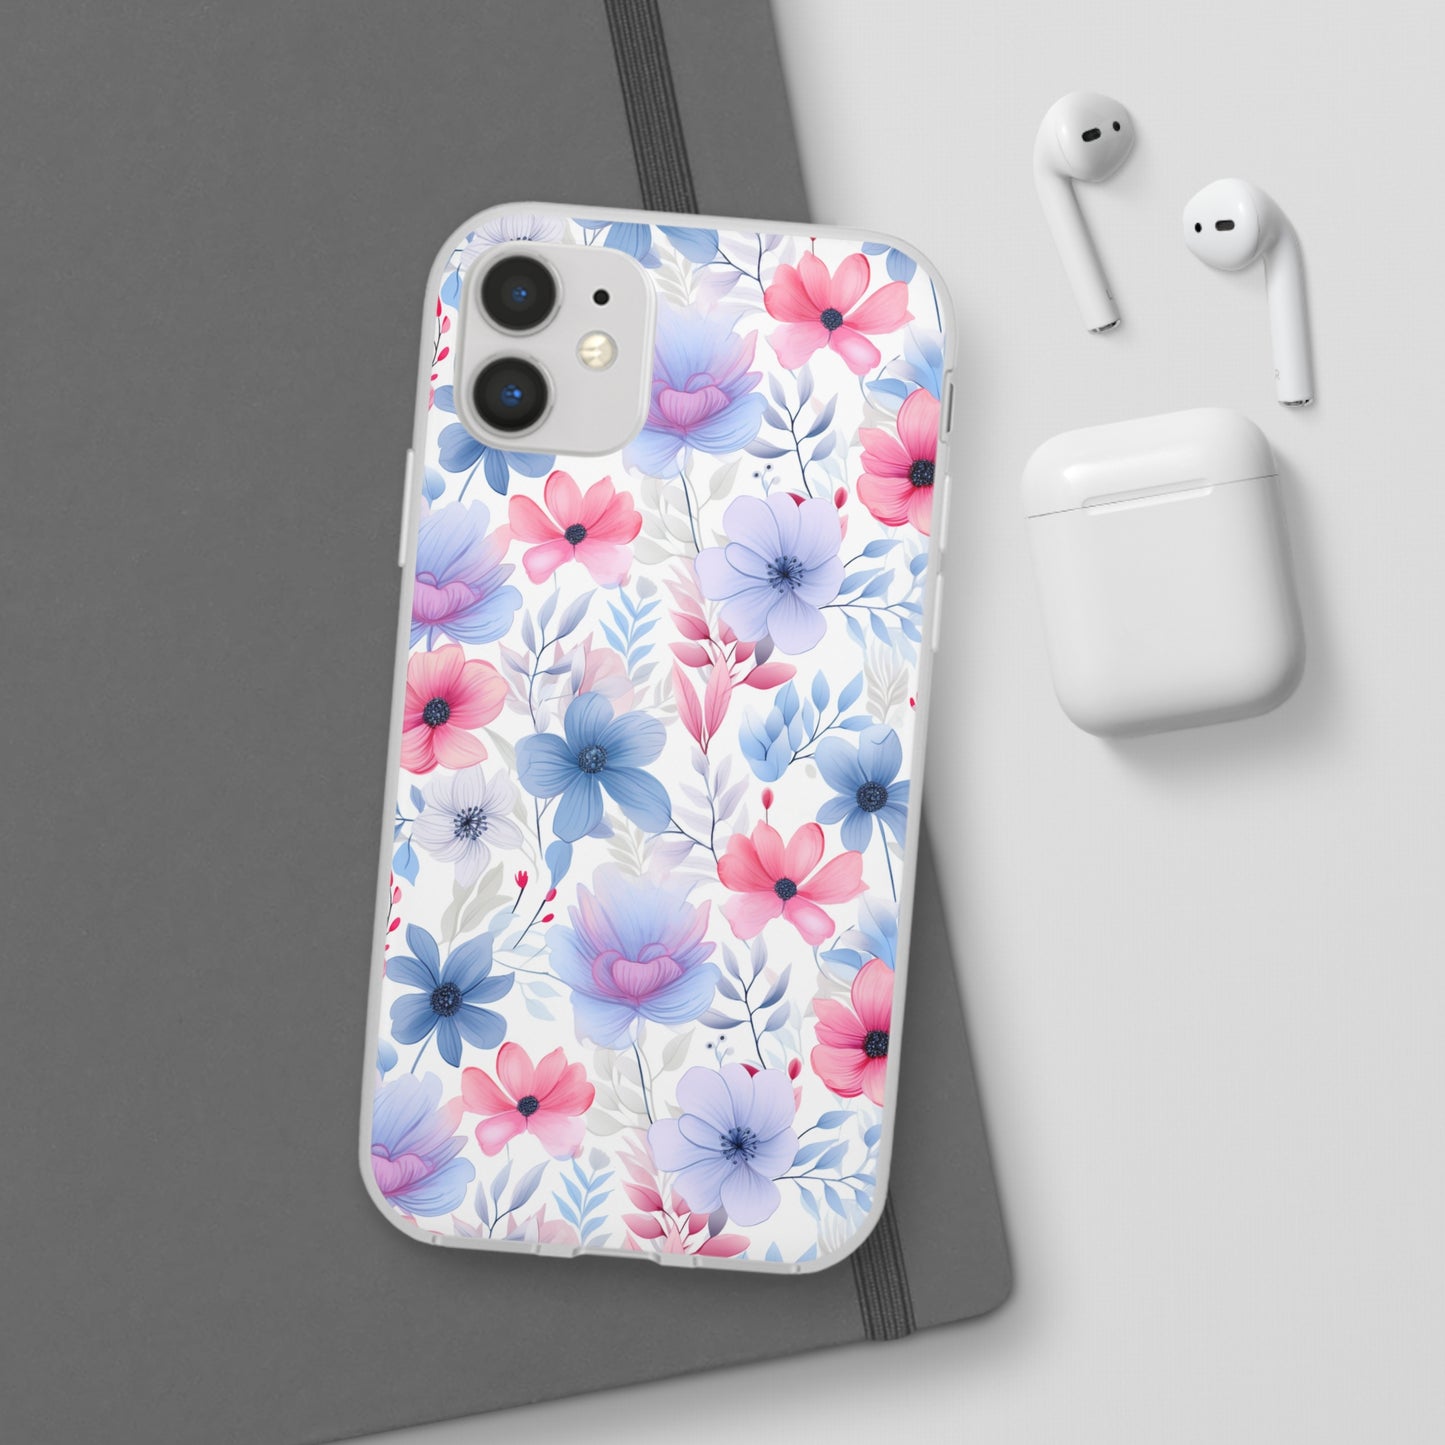 Floral Whispers - Soft Hues of Violets, Pinks, and Blues - Flexi Phone Case Phone Case Pattern Symphony iPhone 11  